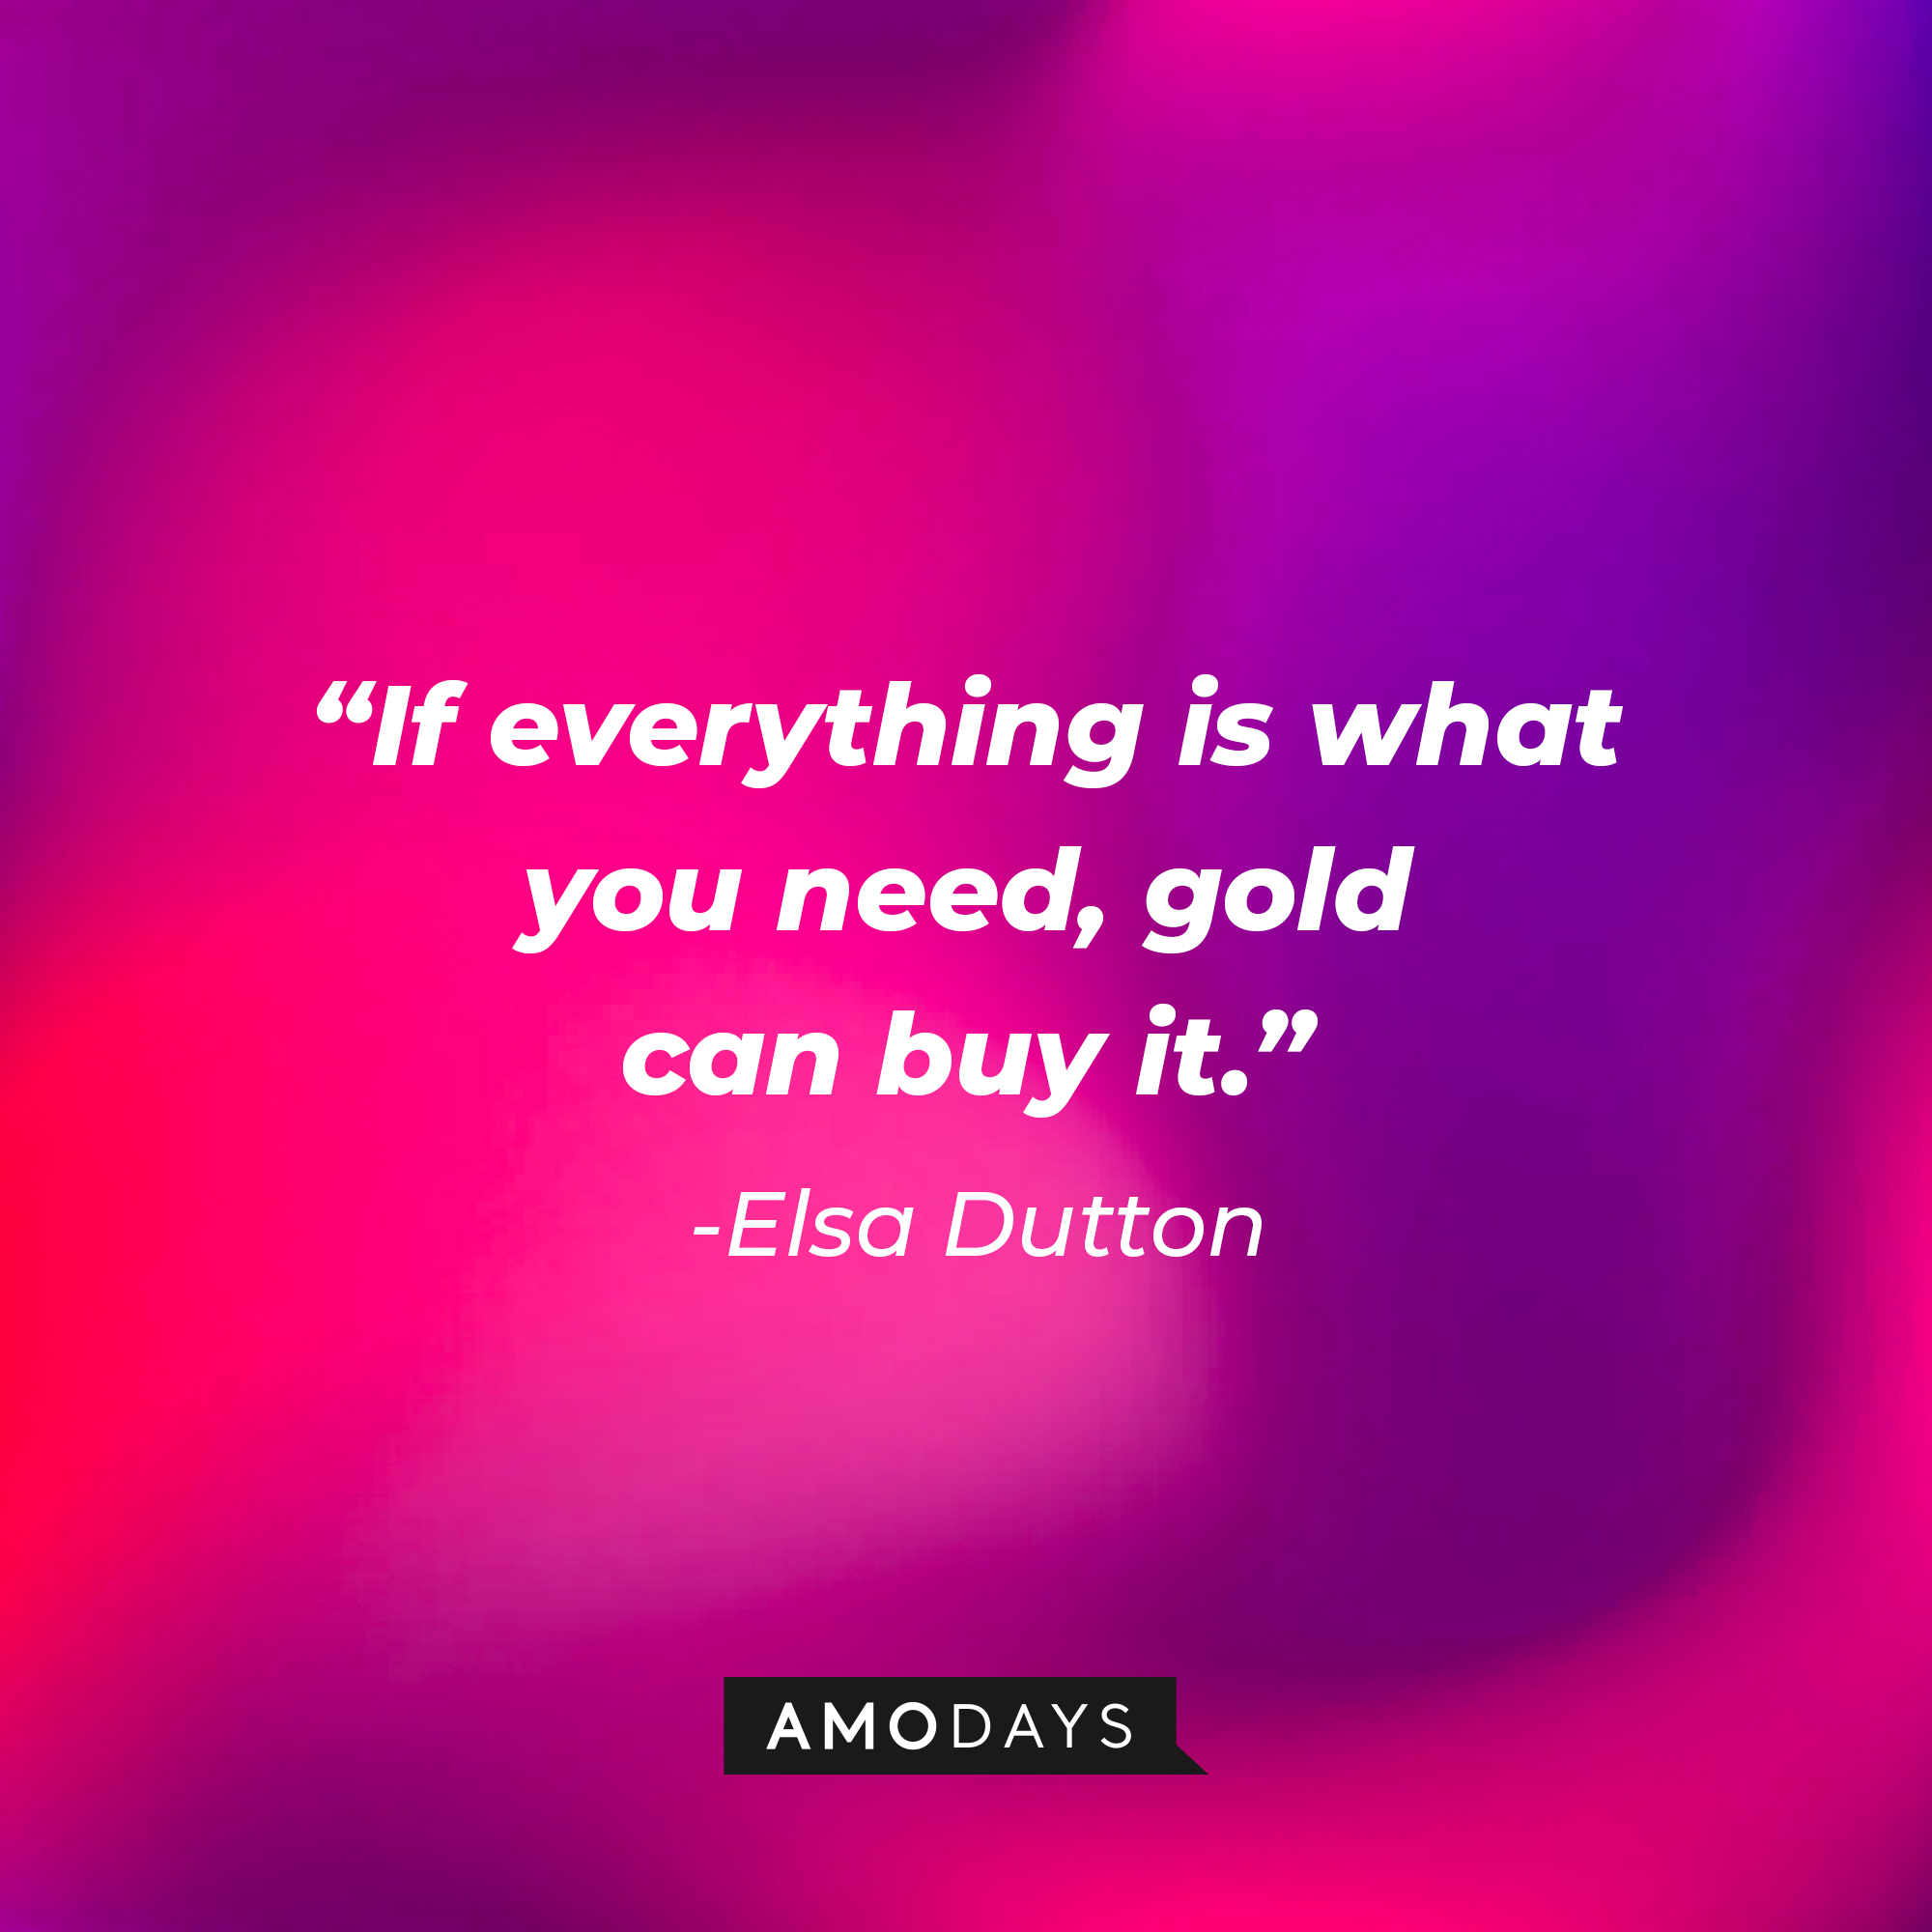 Elsa Dutton's quote: "If everything is what you need, gold can buy it." | Source: AmoDays